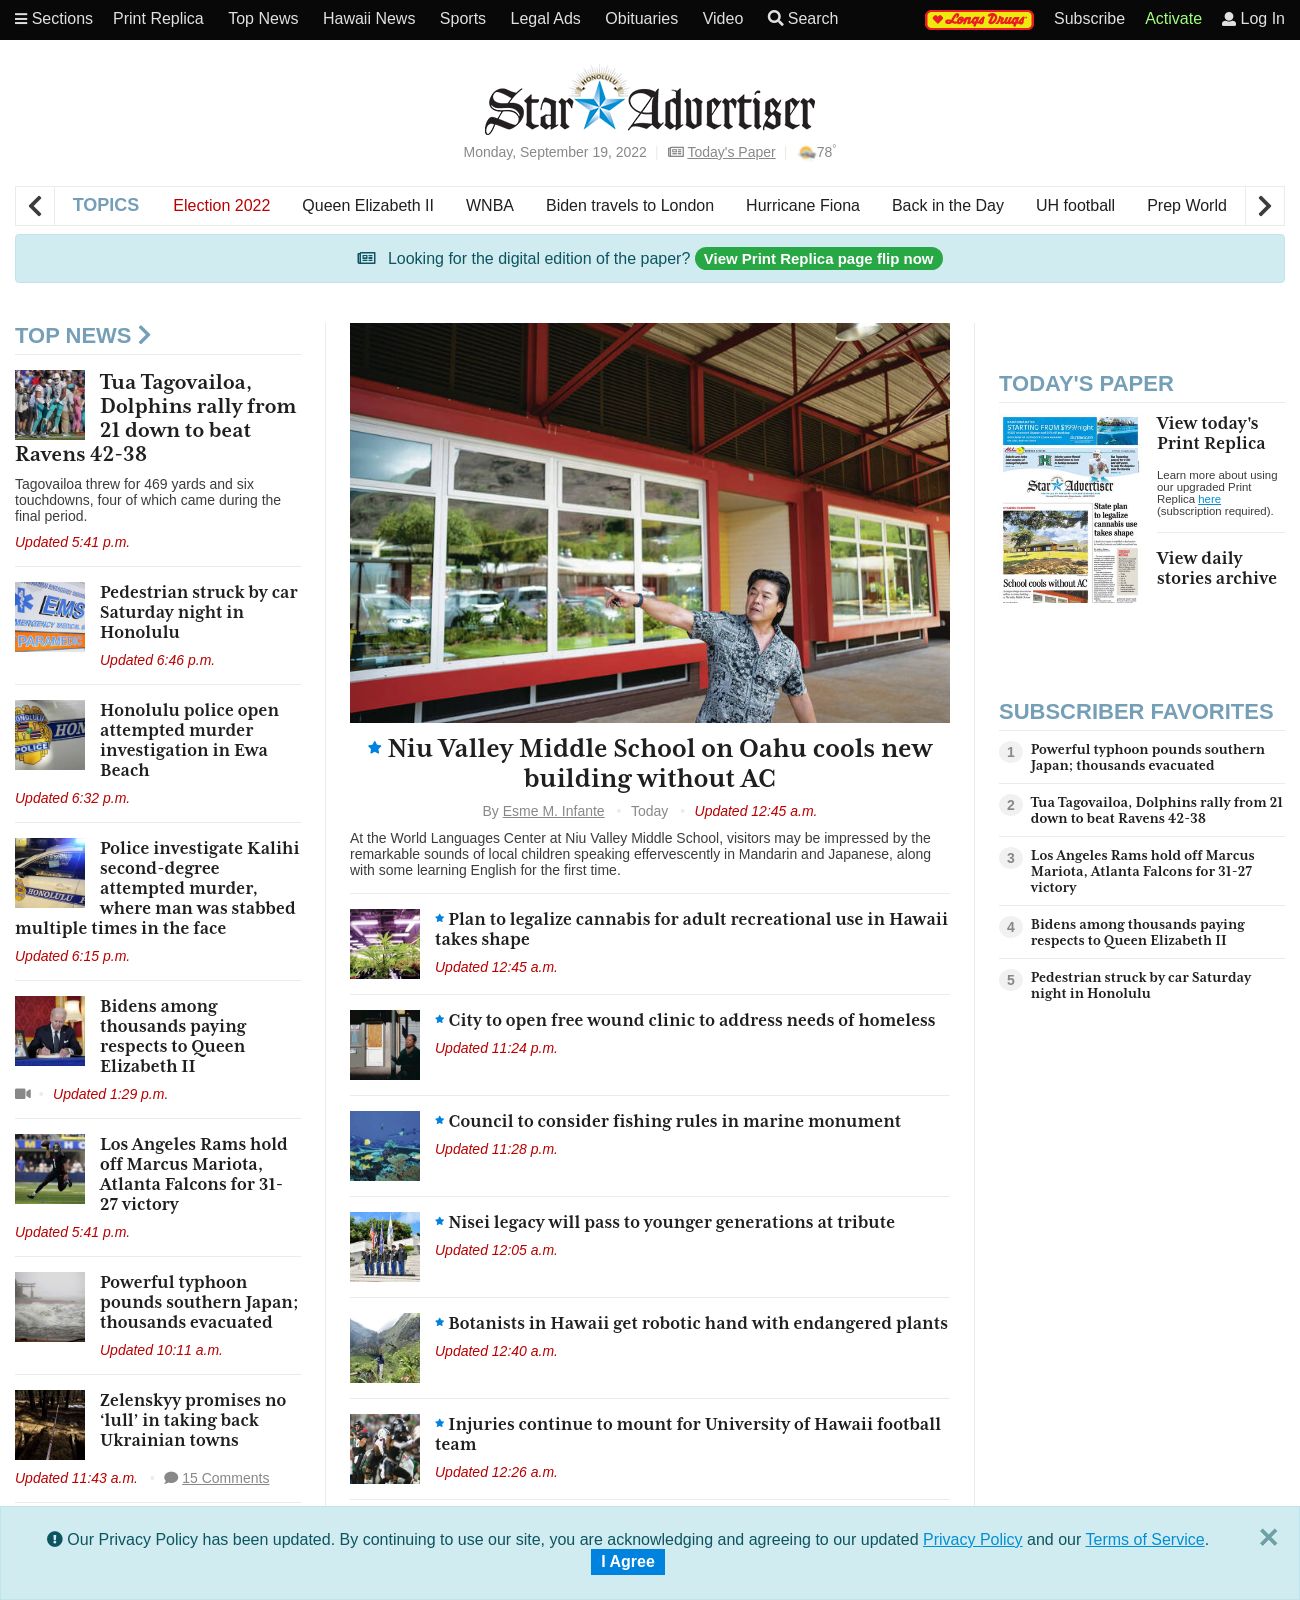 Honolulu Star-Advertiser at 2022-09-19 04:06:12-10:00 local time